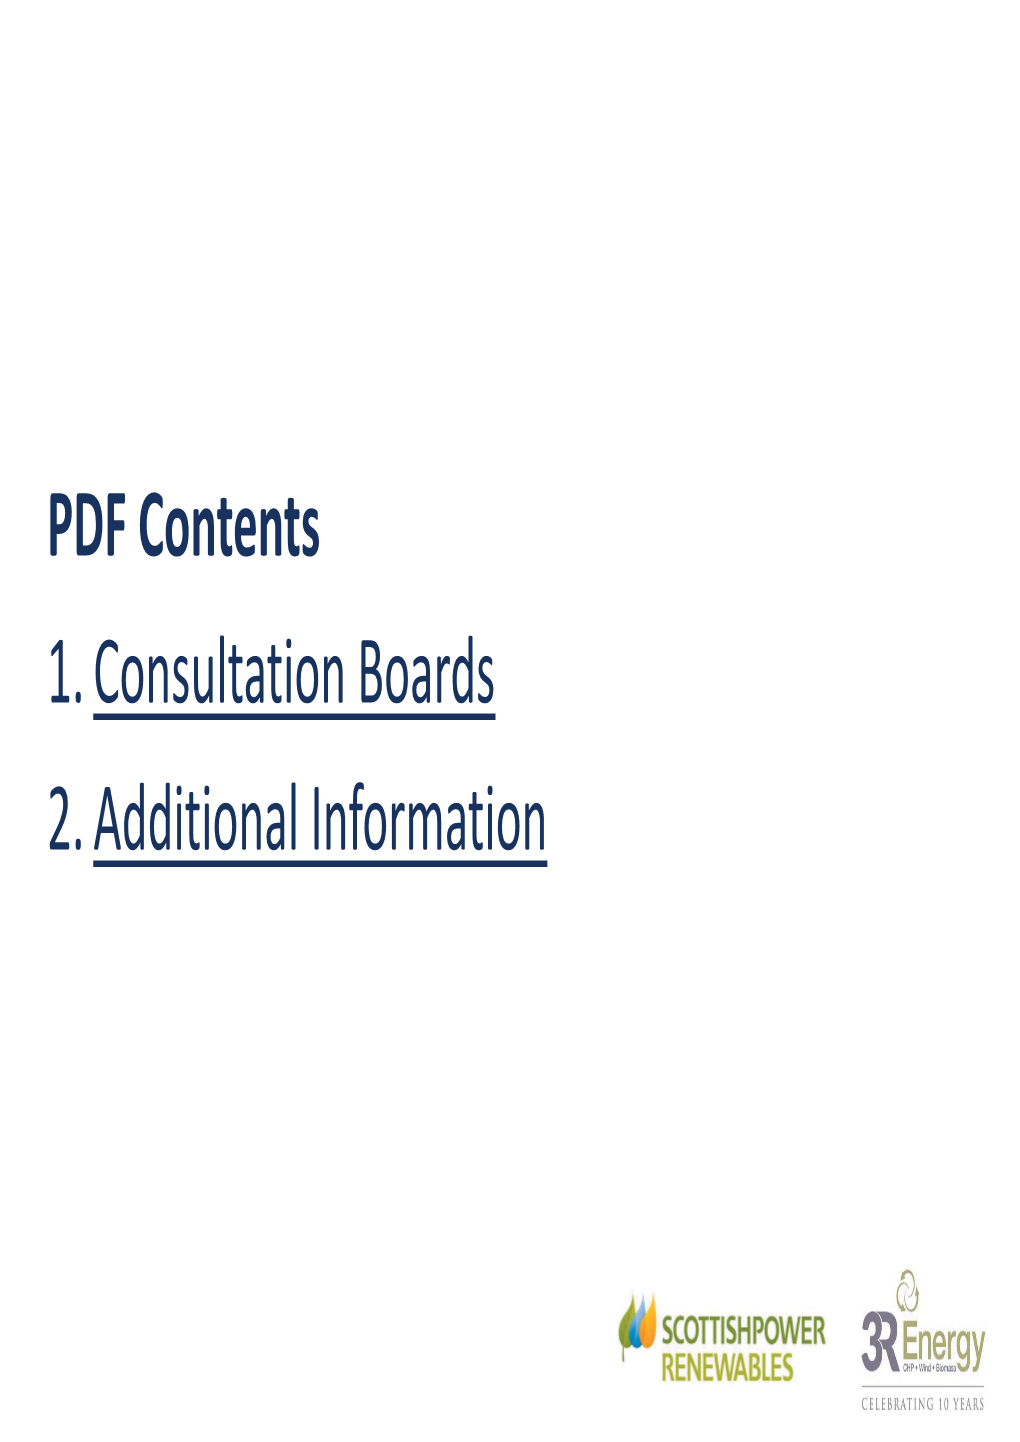 PDF Contents 1.Consultation Boards 2.Additional Information